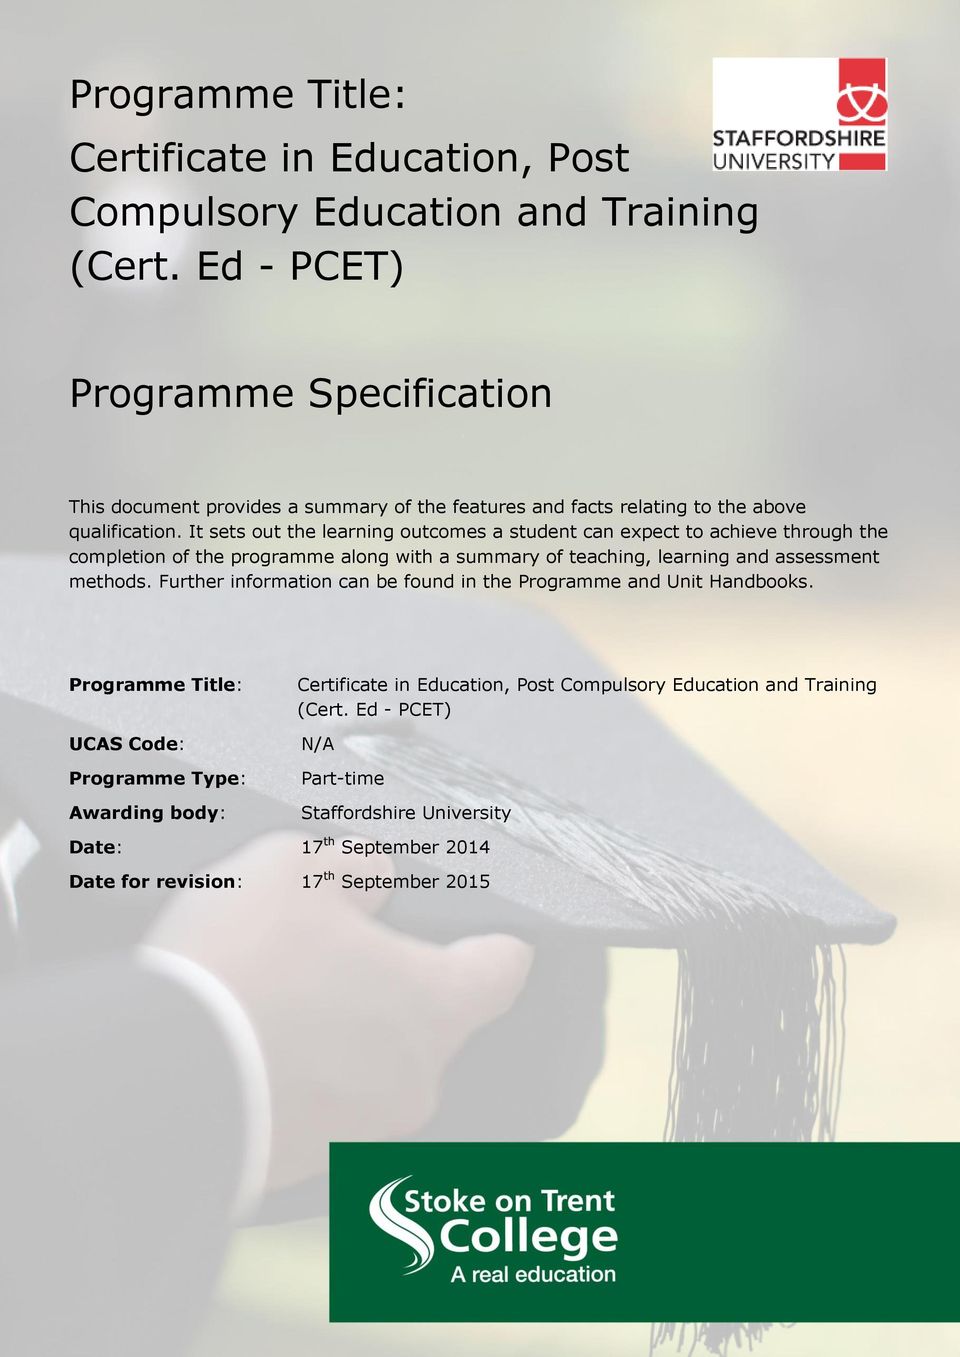 It sets out the learning outcomes a student can expect to achieve through the completion of the programme along with a summary of teaching, learning and assessment methods.